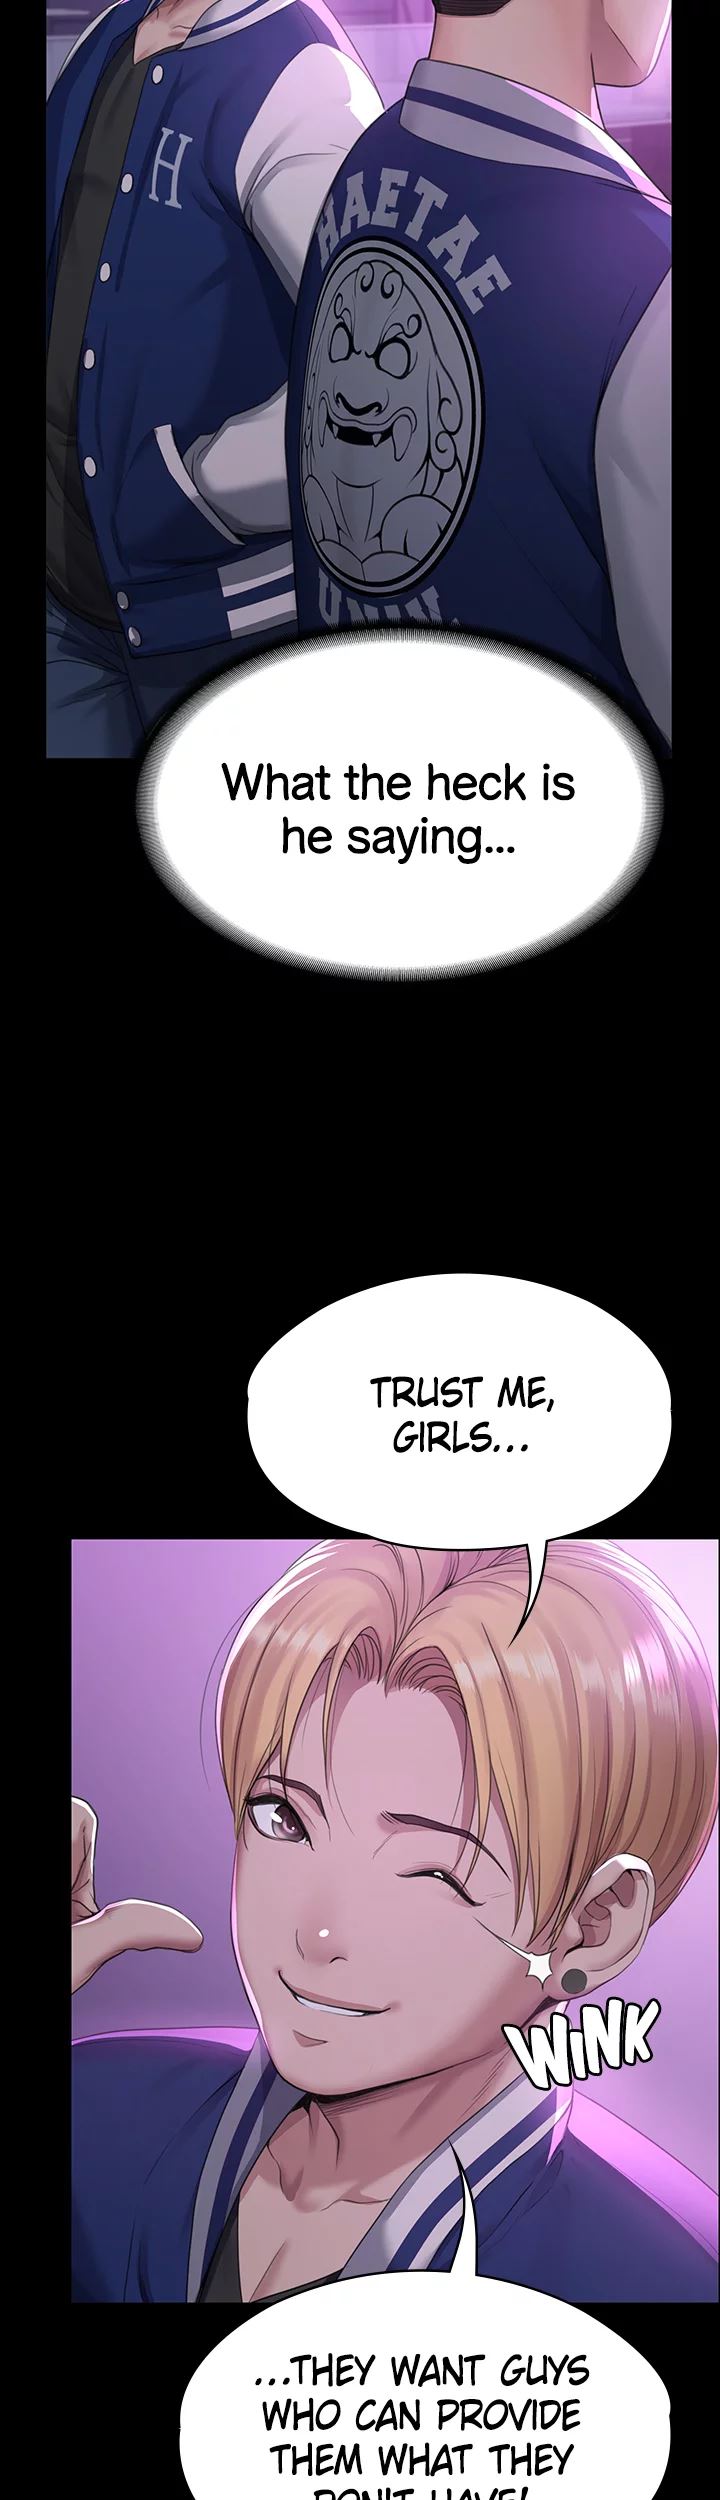 Bully Girl - Chapter 1 Page 49